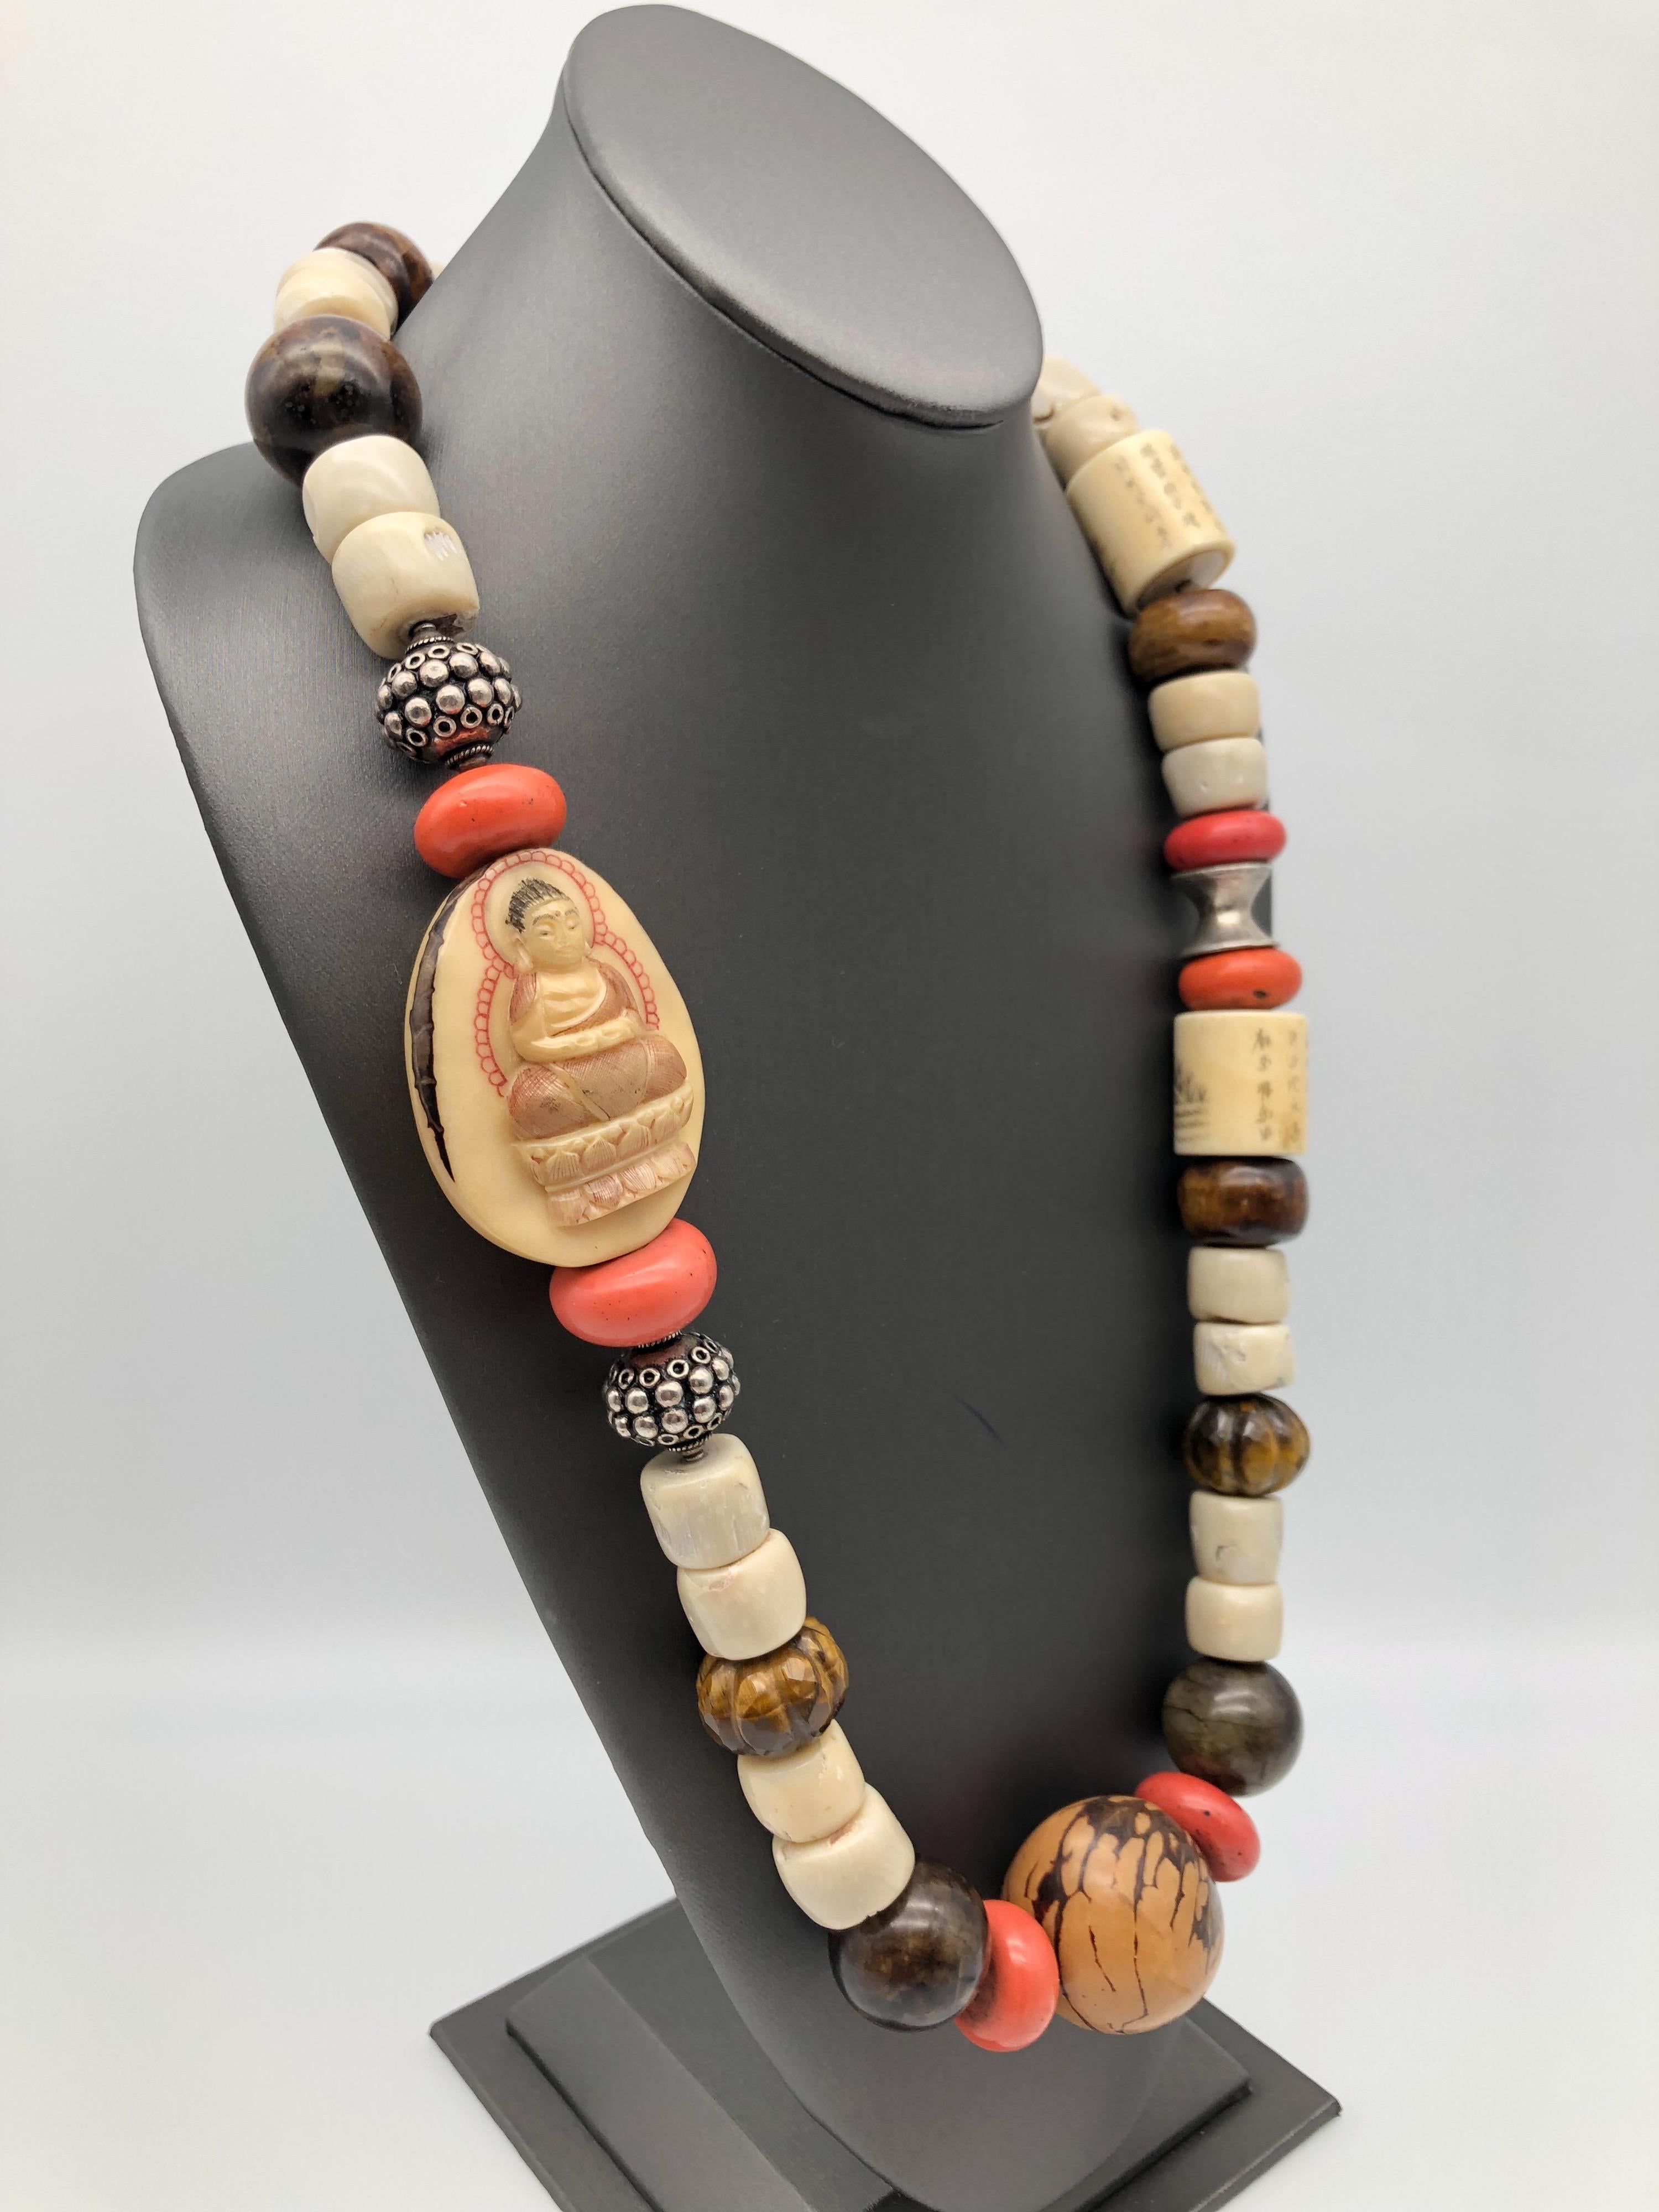 One-of-a-Kind
A remarkable contemporary necklace. Featuring stunning Bold pendant, Scrimshaw-Hand-Painted Buddha, and vintage Chinese beads are nicely finished with engraved 